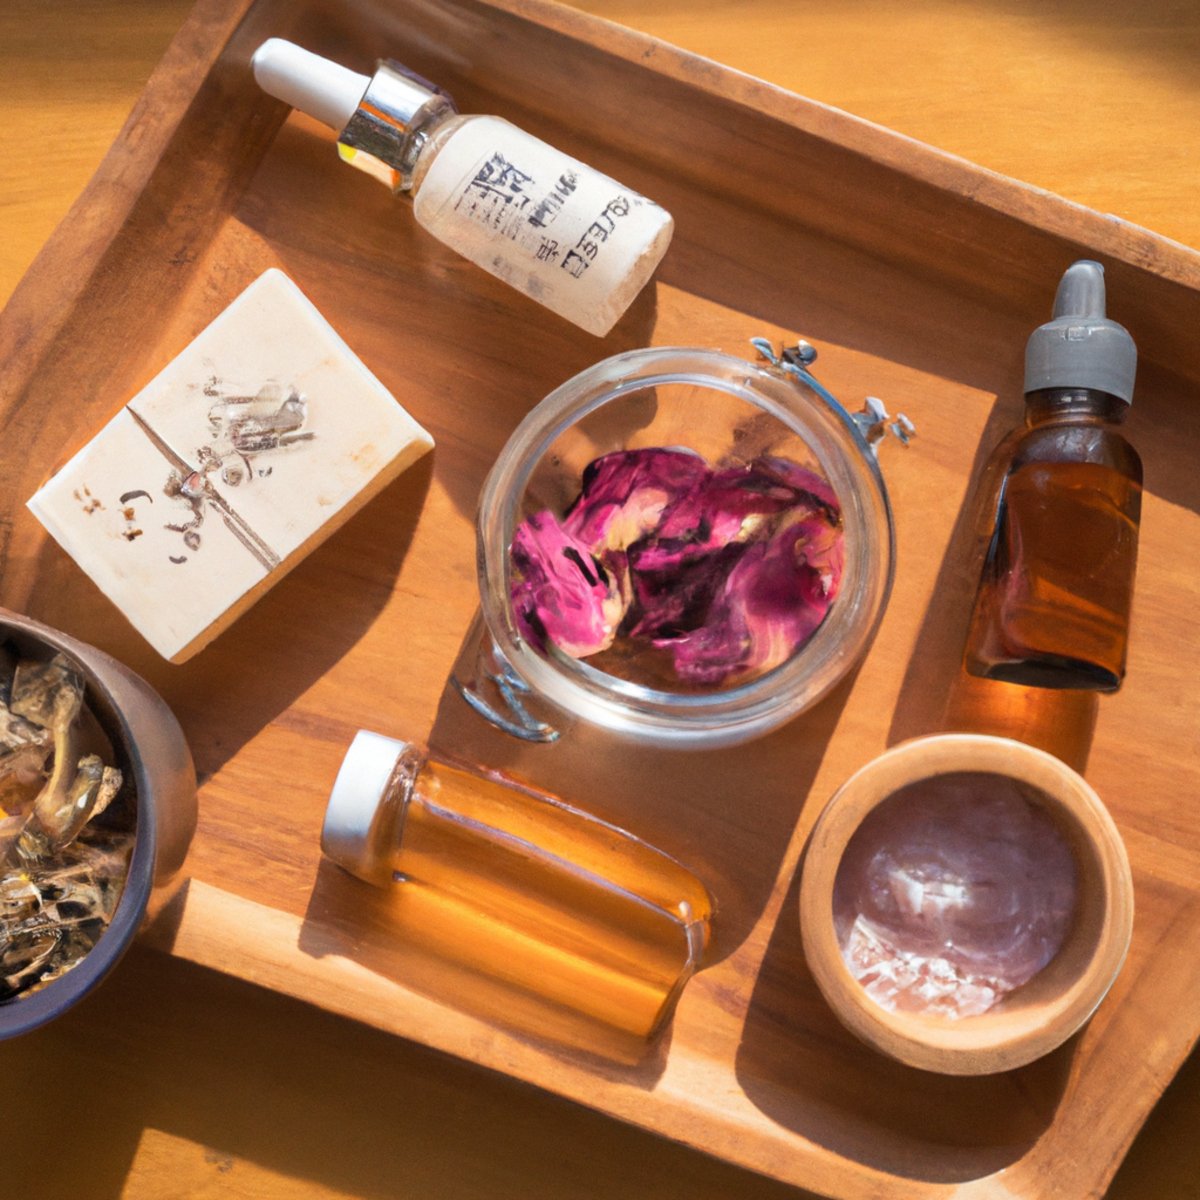 Natural skin care products on wooden tray with lavender sprigs.